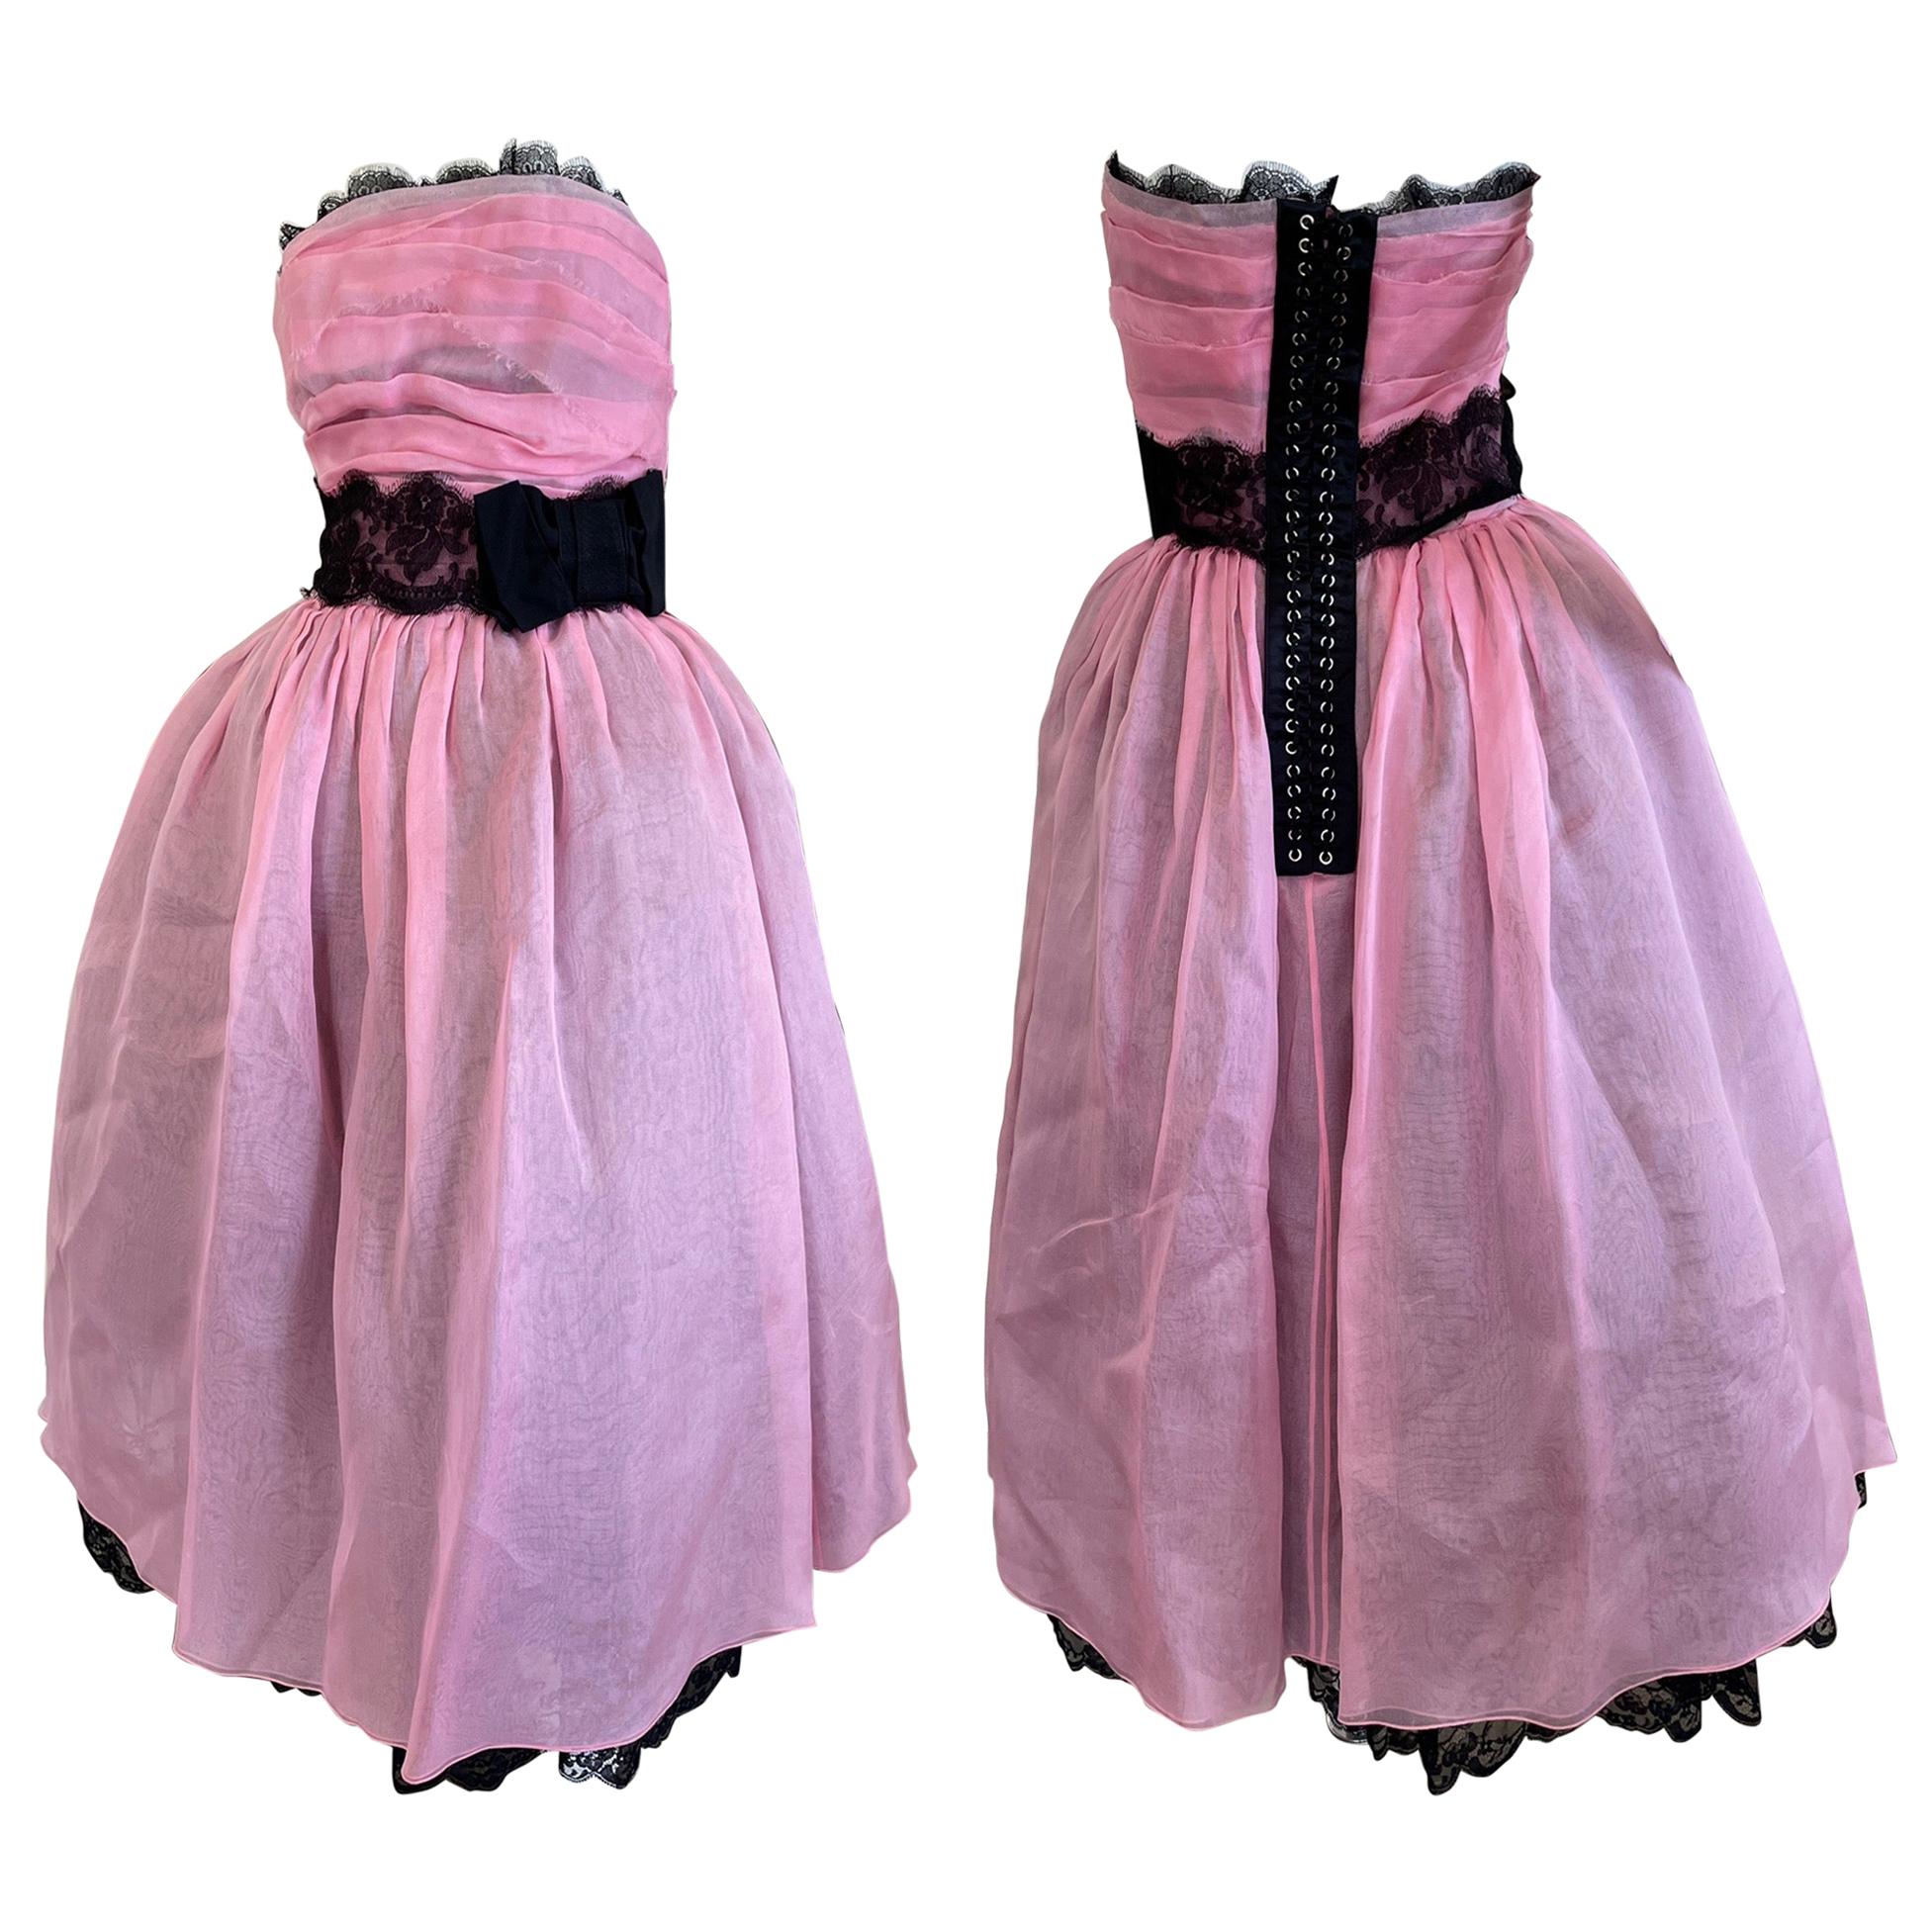 Dolce & Gabbana Pink 1950's Style Vintage Cocktail Dress w Corset Lacing Detail  For Sale